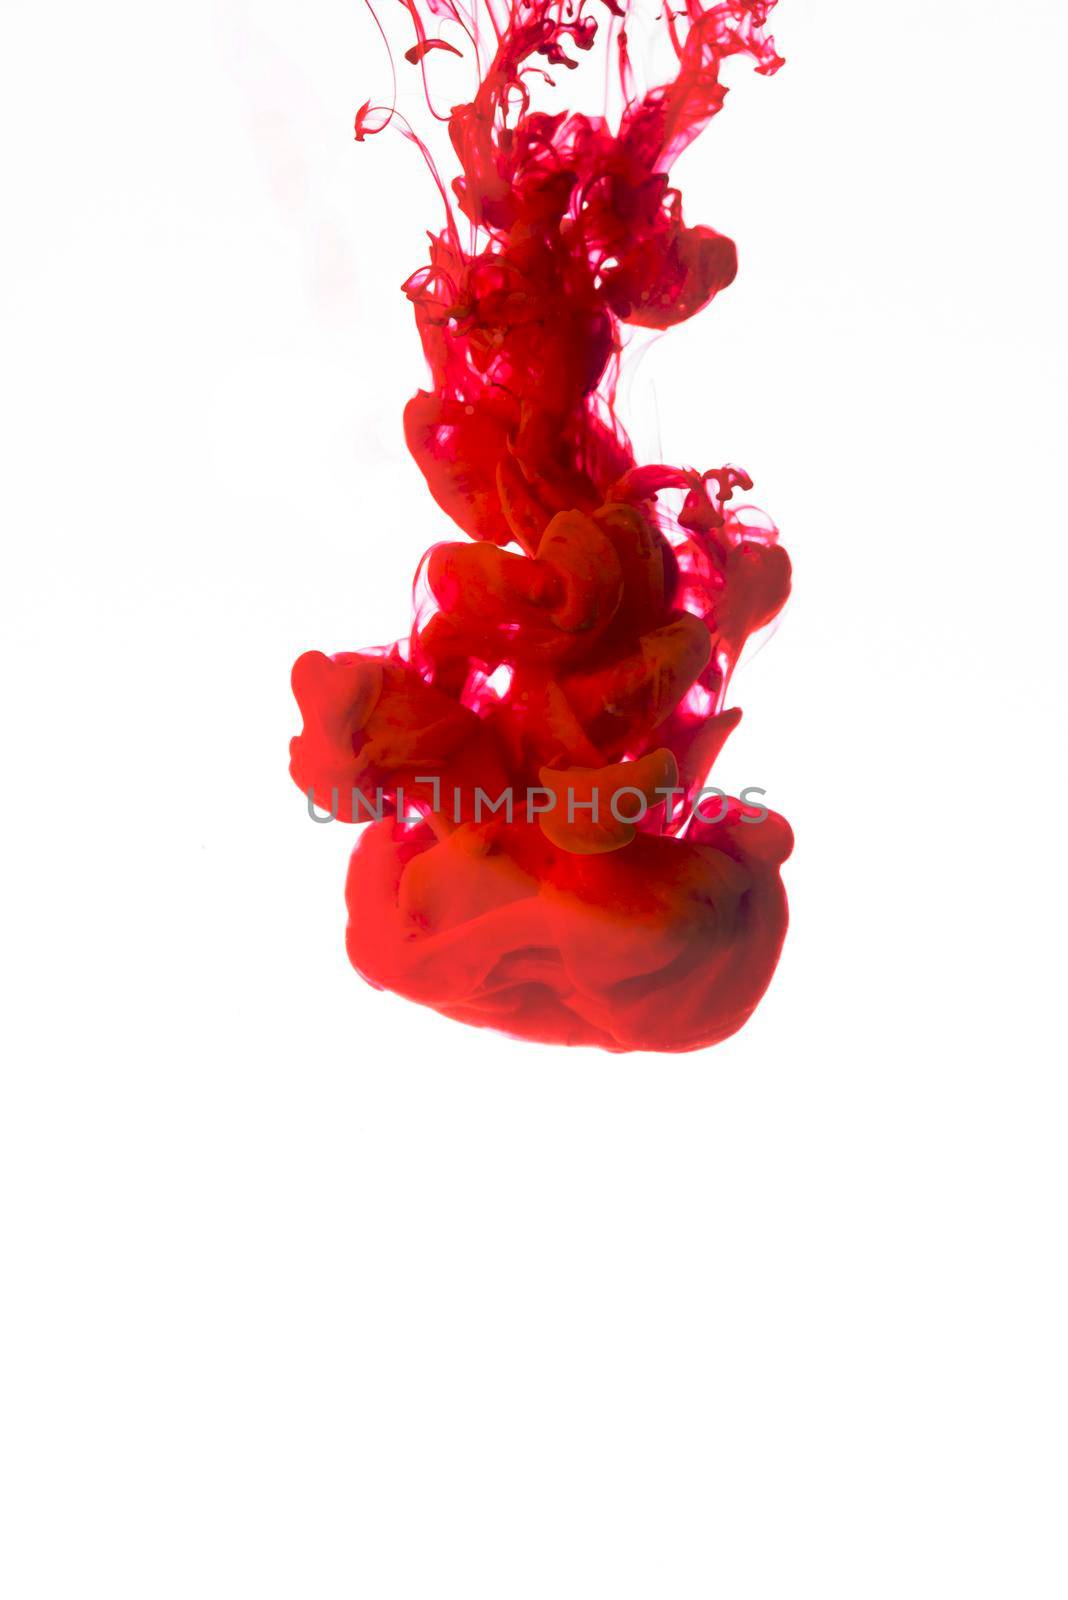 vivid red droplet ink. High resolution photo